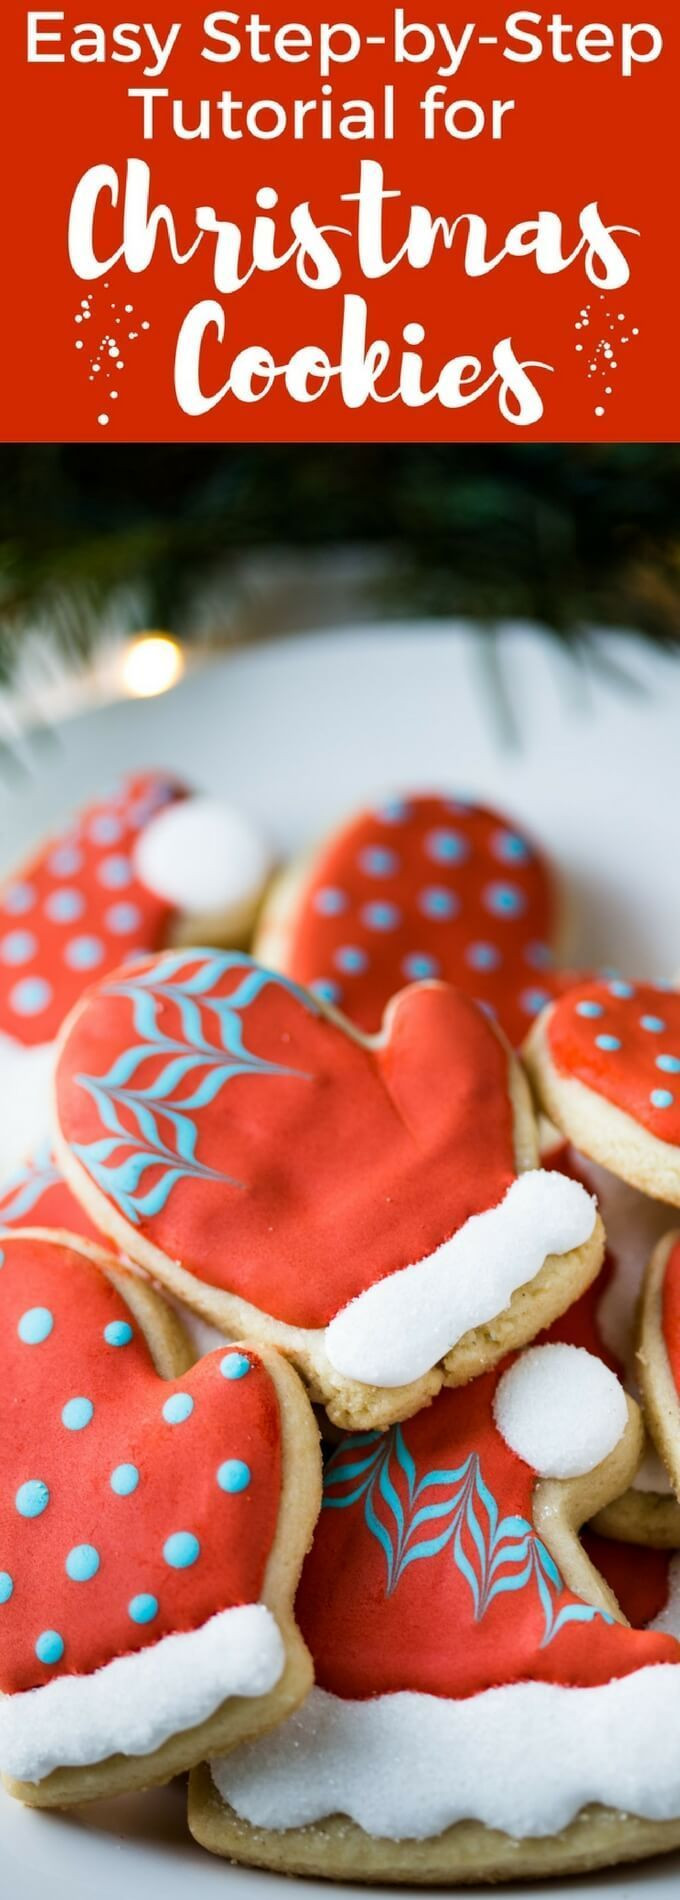 Decorated Christmas Cookies Recipes
 An easy Christmas Cookie Decorating Tutorial for Hat and